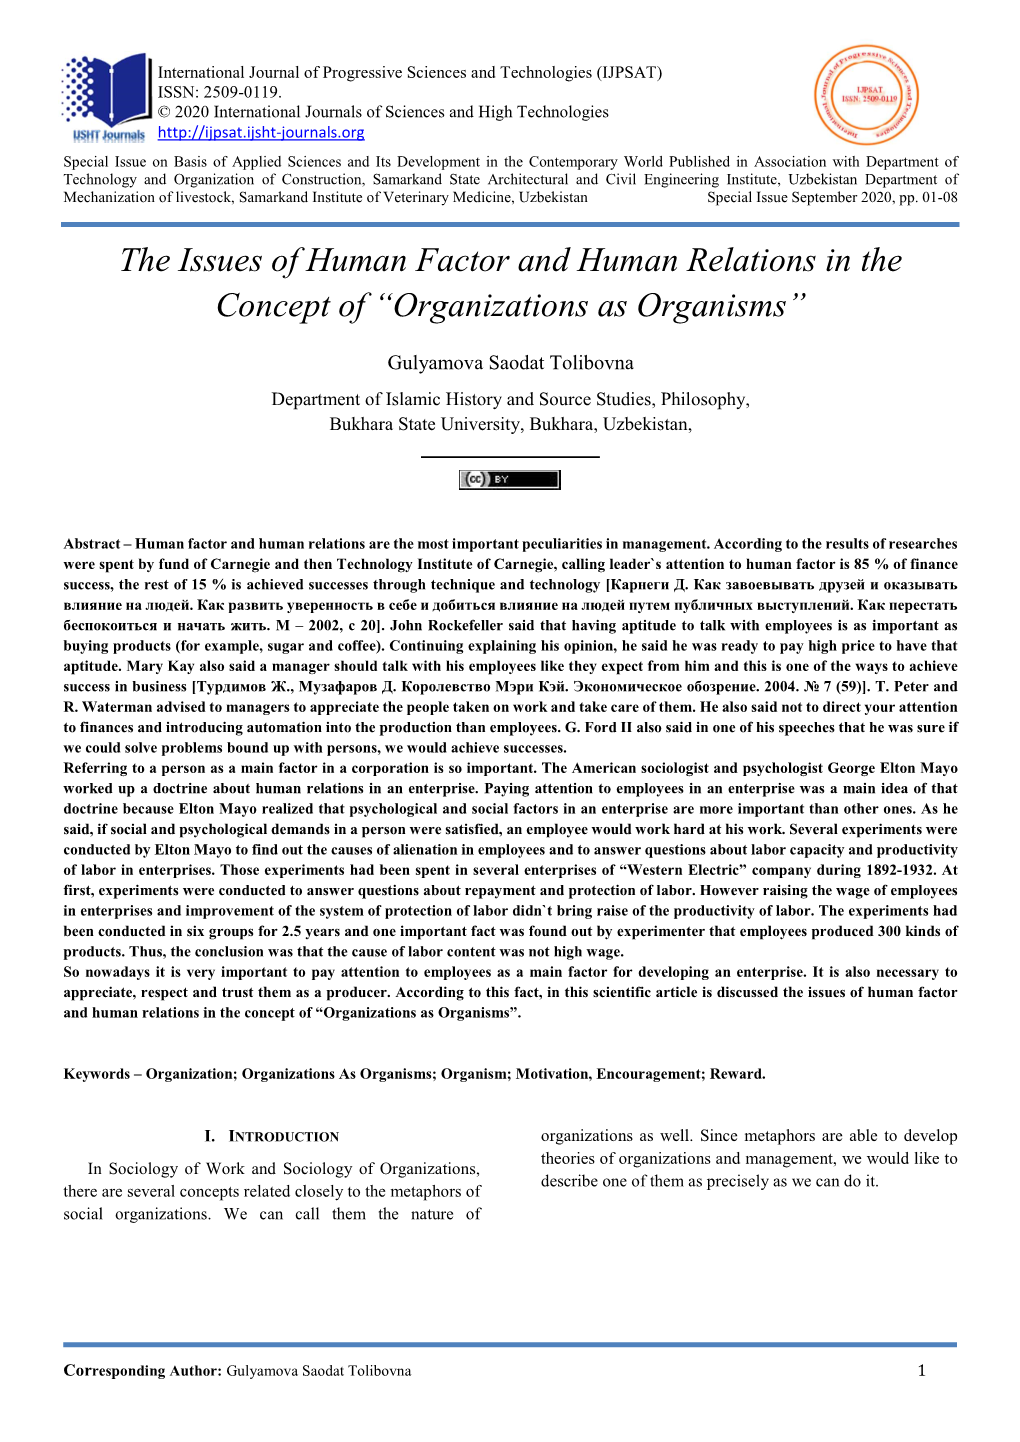 The Issues of Human Factor and Human Relations in the Concept of “Organizations As Organisms”